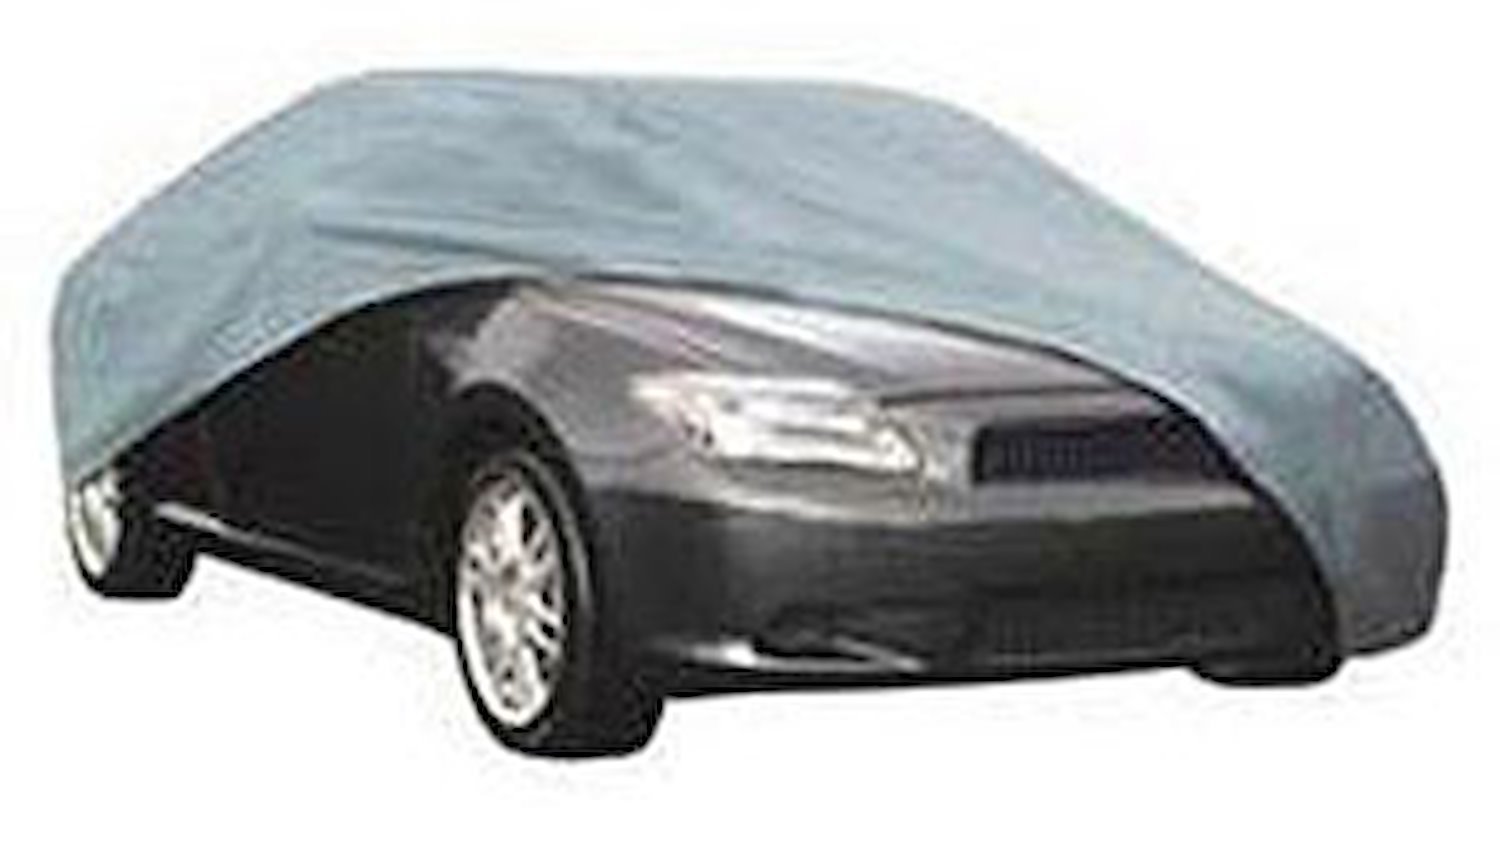 Budge Lite Car Cover Fits Cars Up To 19" in Length